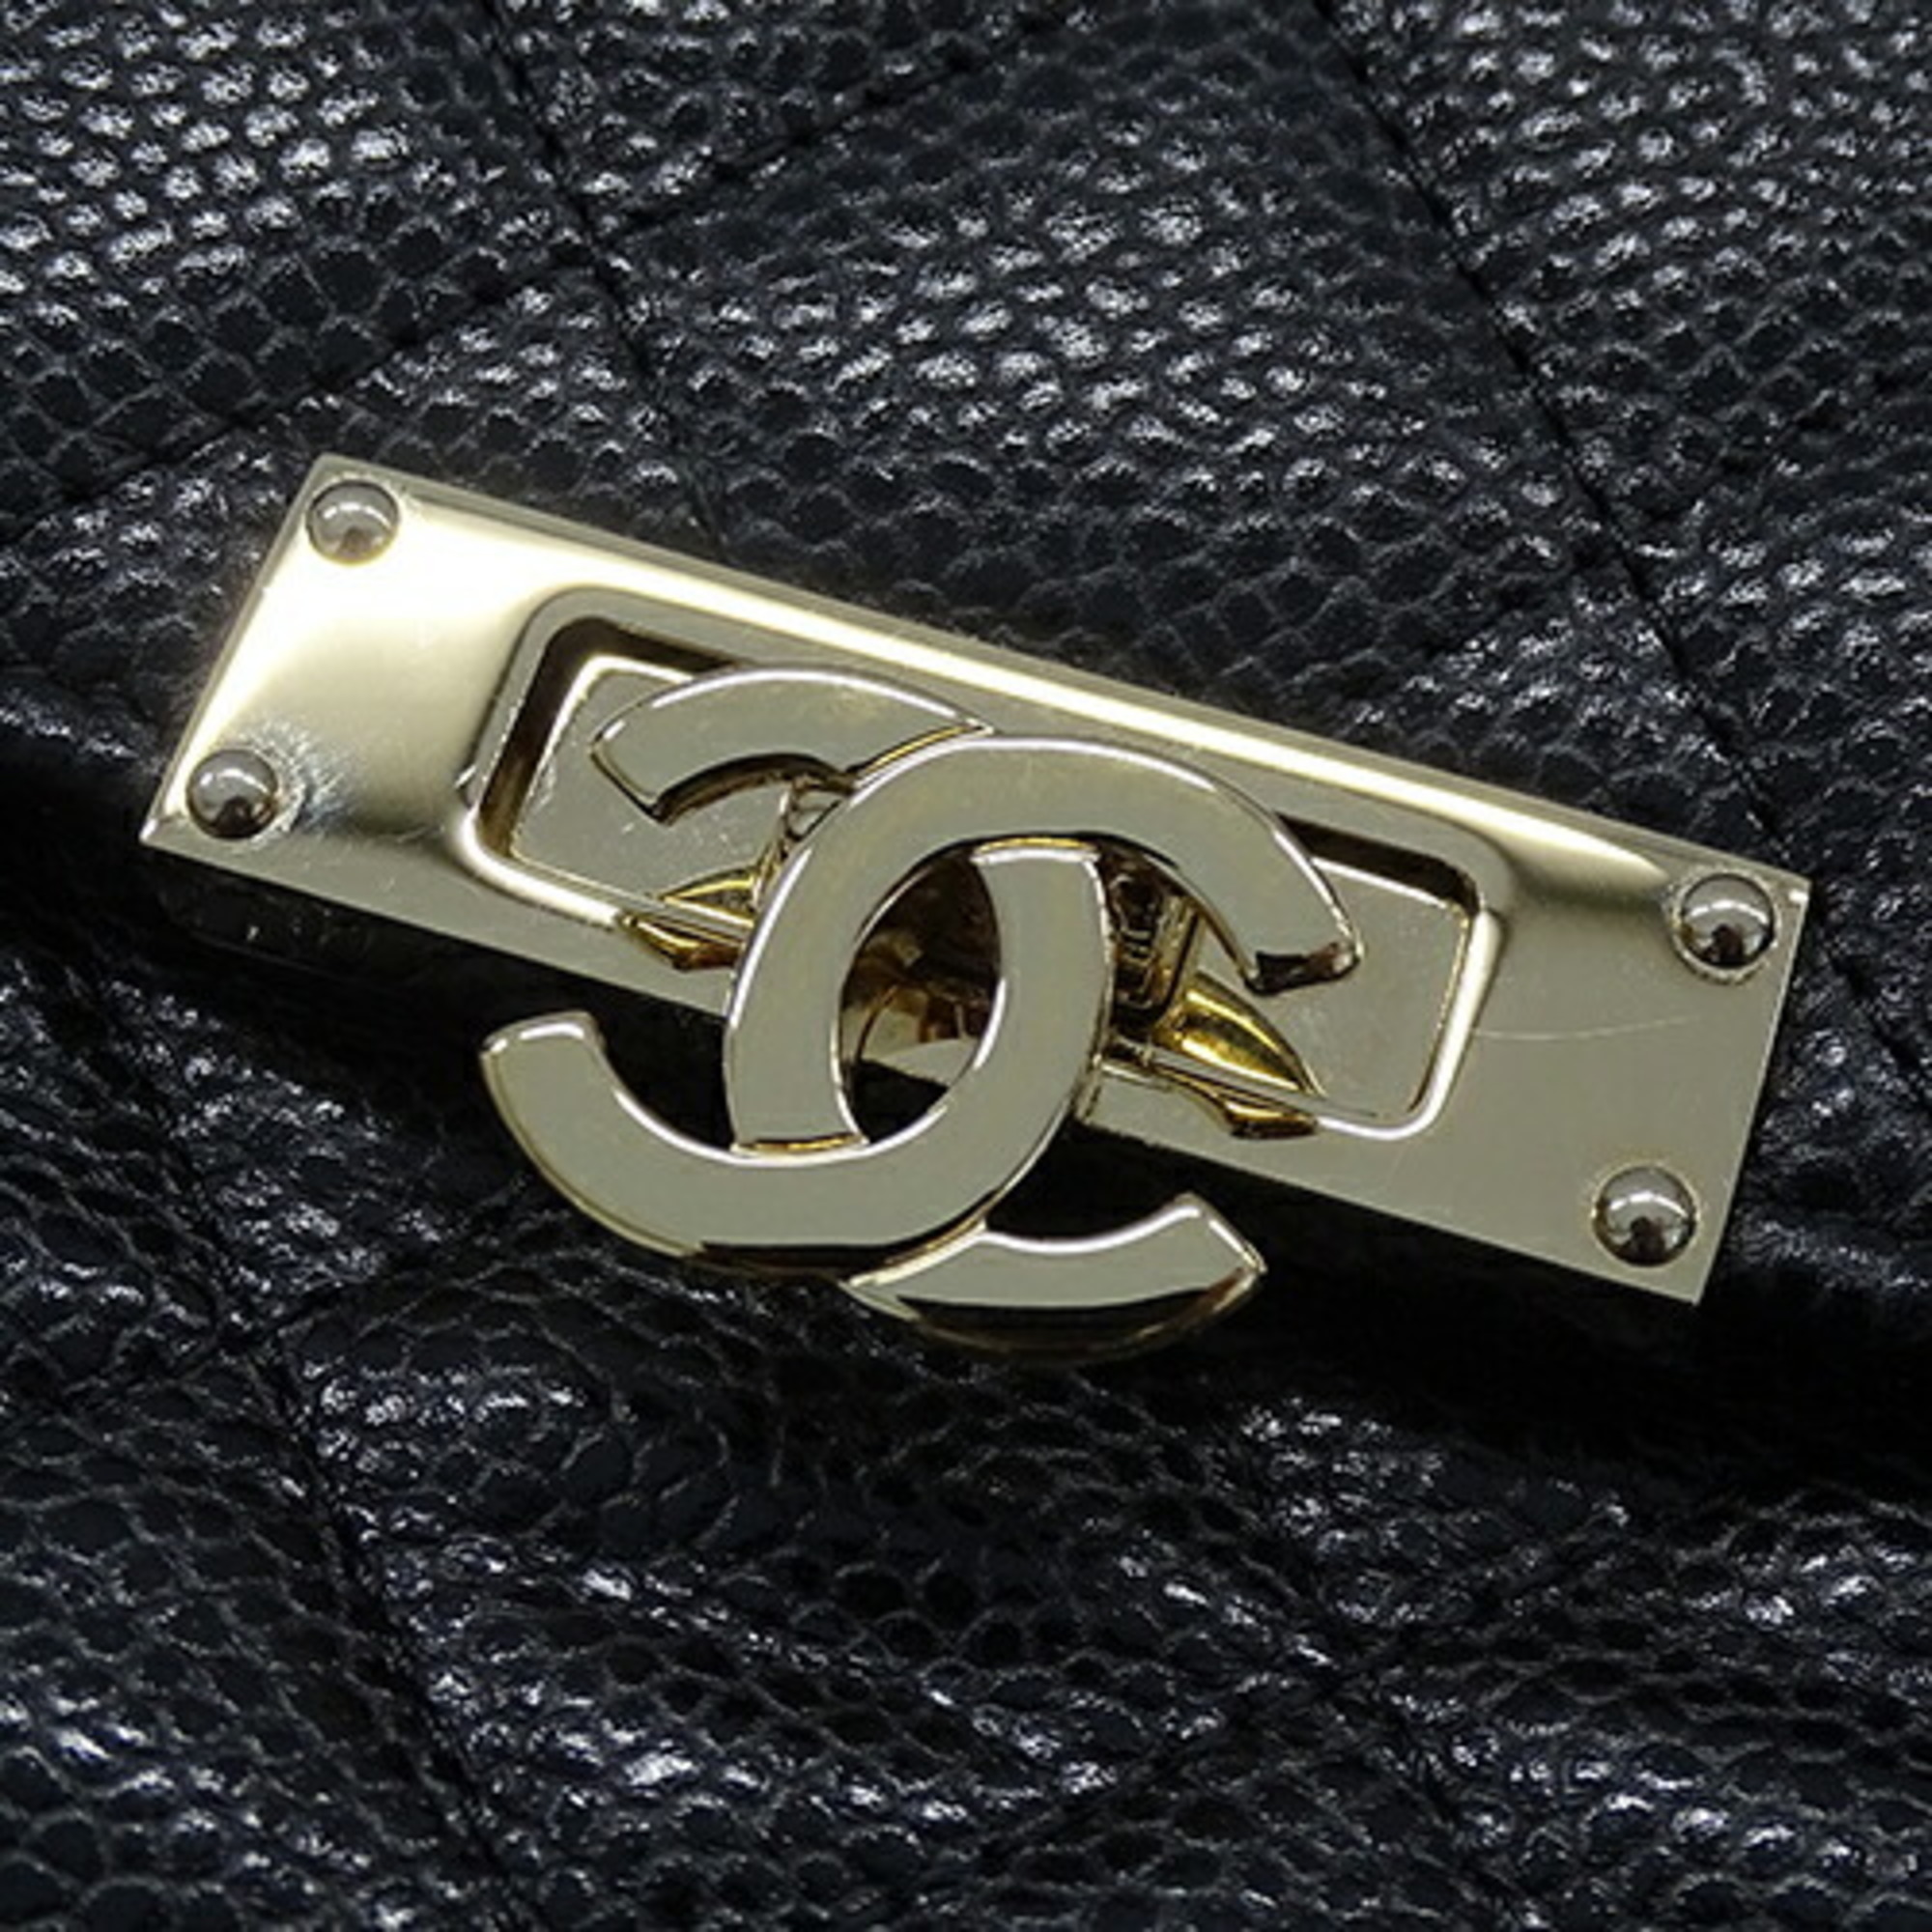 CHANEL Bags for Women and Men, Clutch Bags, Second Caviar Skin, Matelasse, Black, Champagne